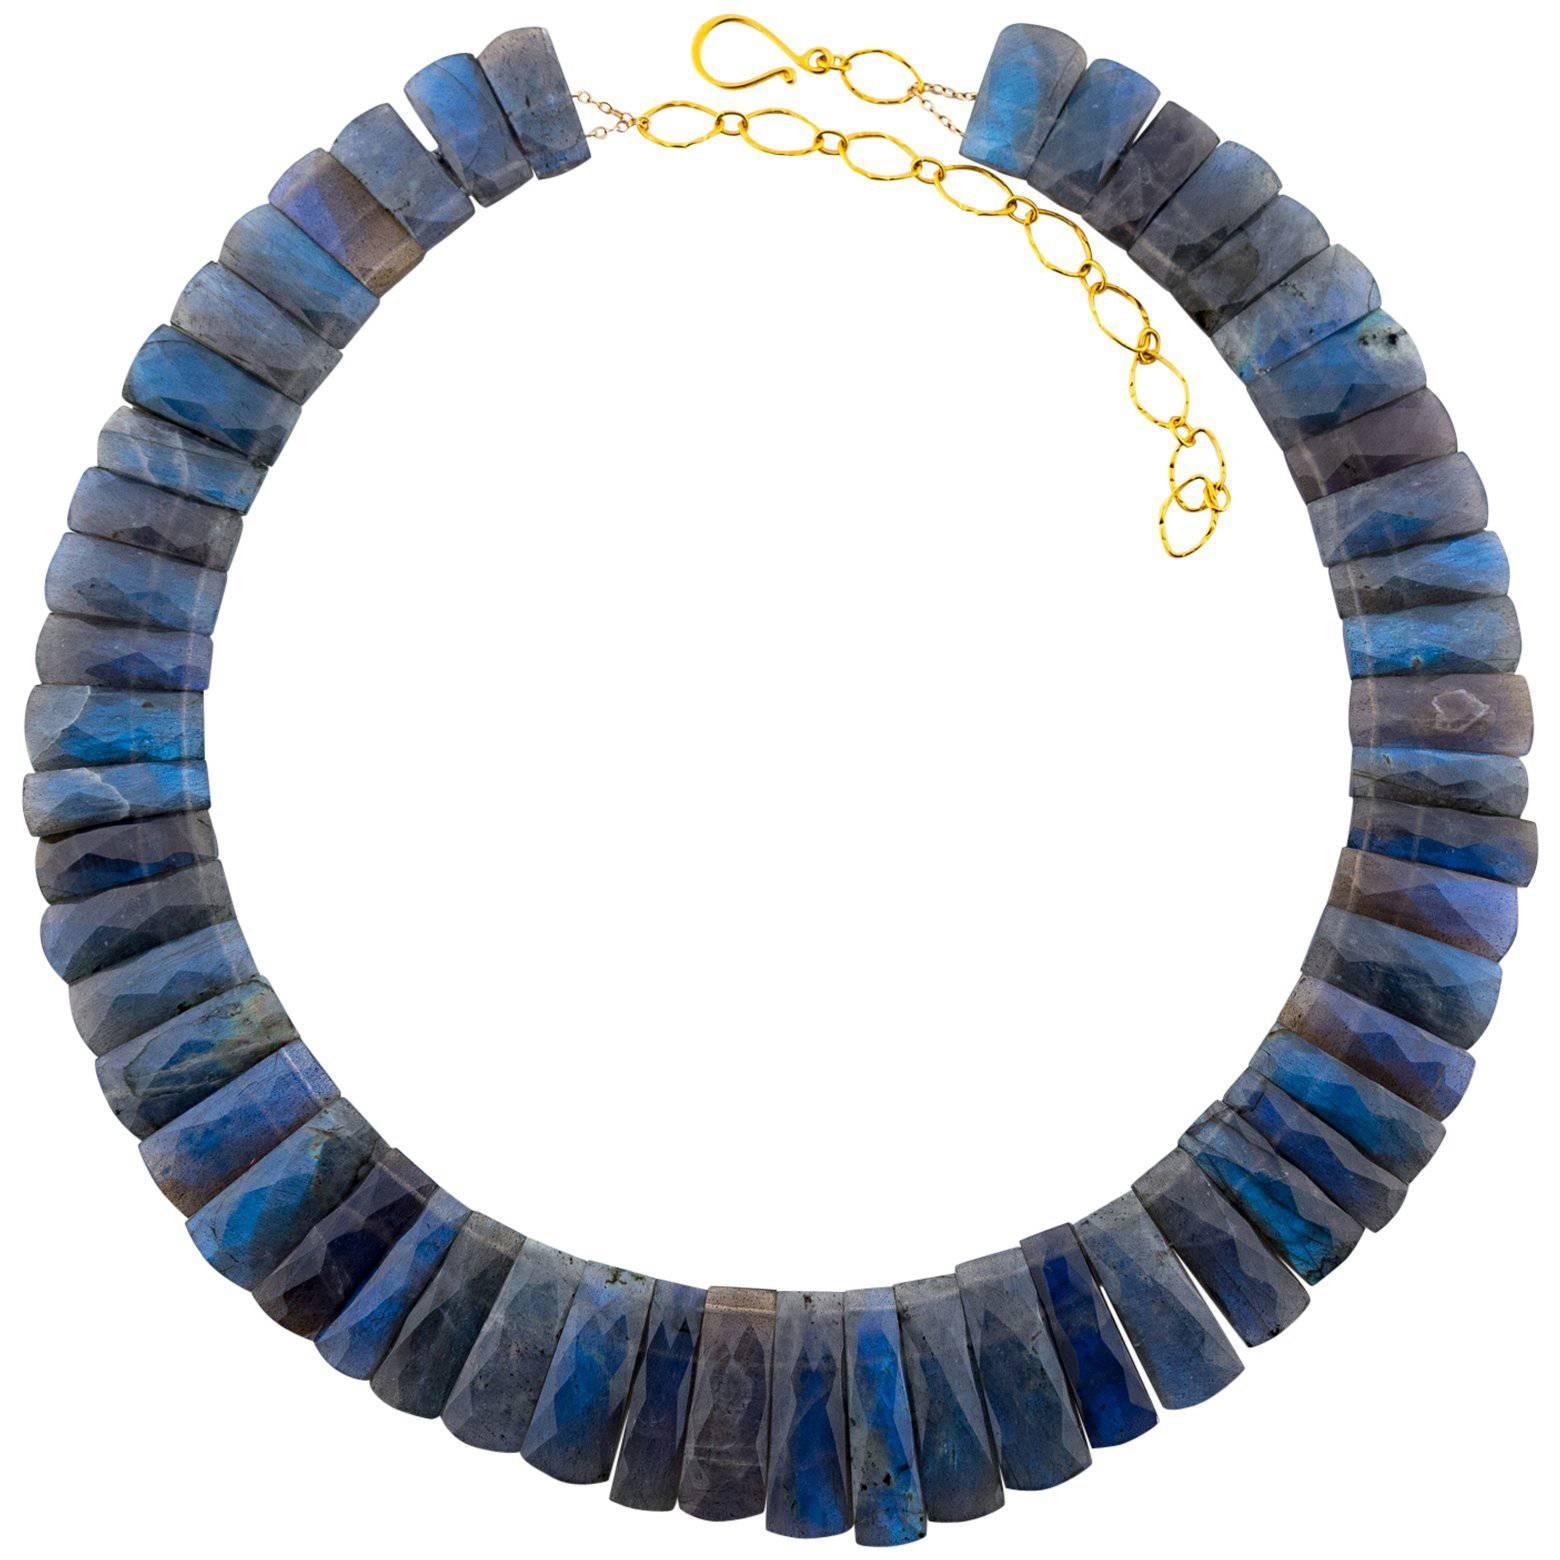 This beautiful Labradorite necklace is stunning and has a great weight to it. The iridescence of it captures the light is so many different angles that the blue tones absolutely glow! Very regal and very elegant!